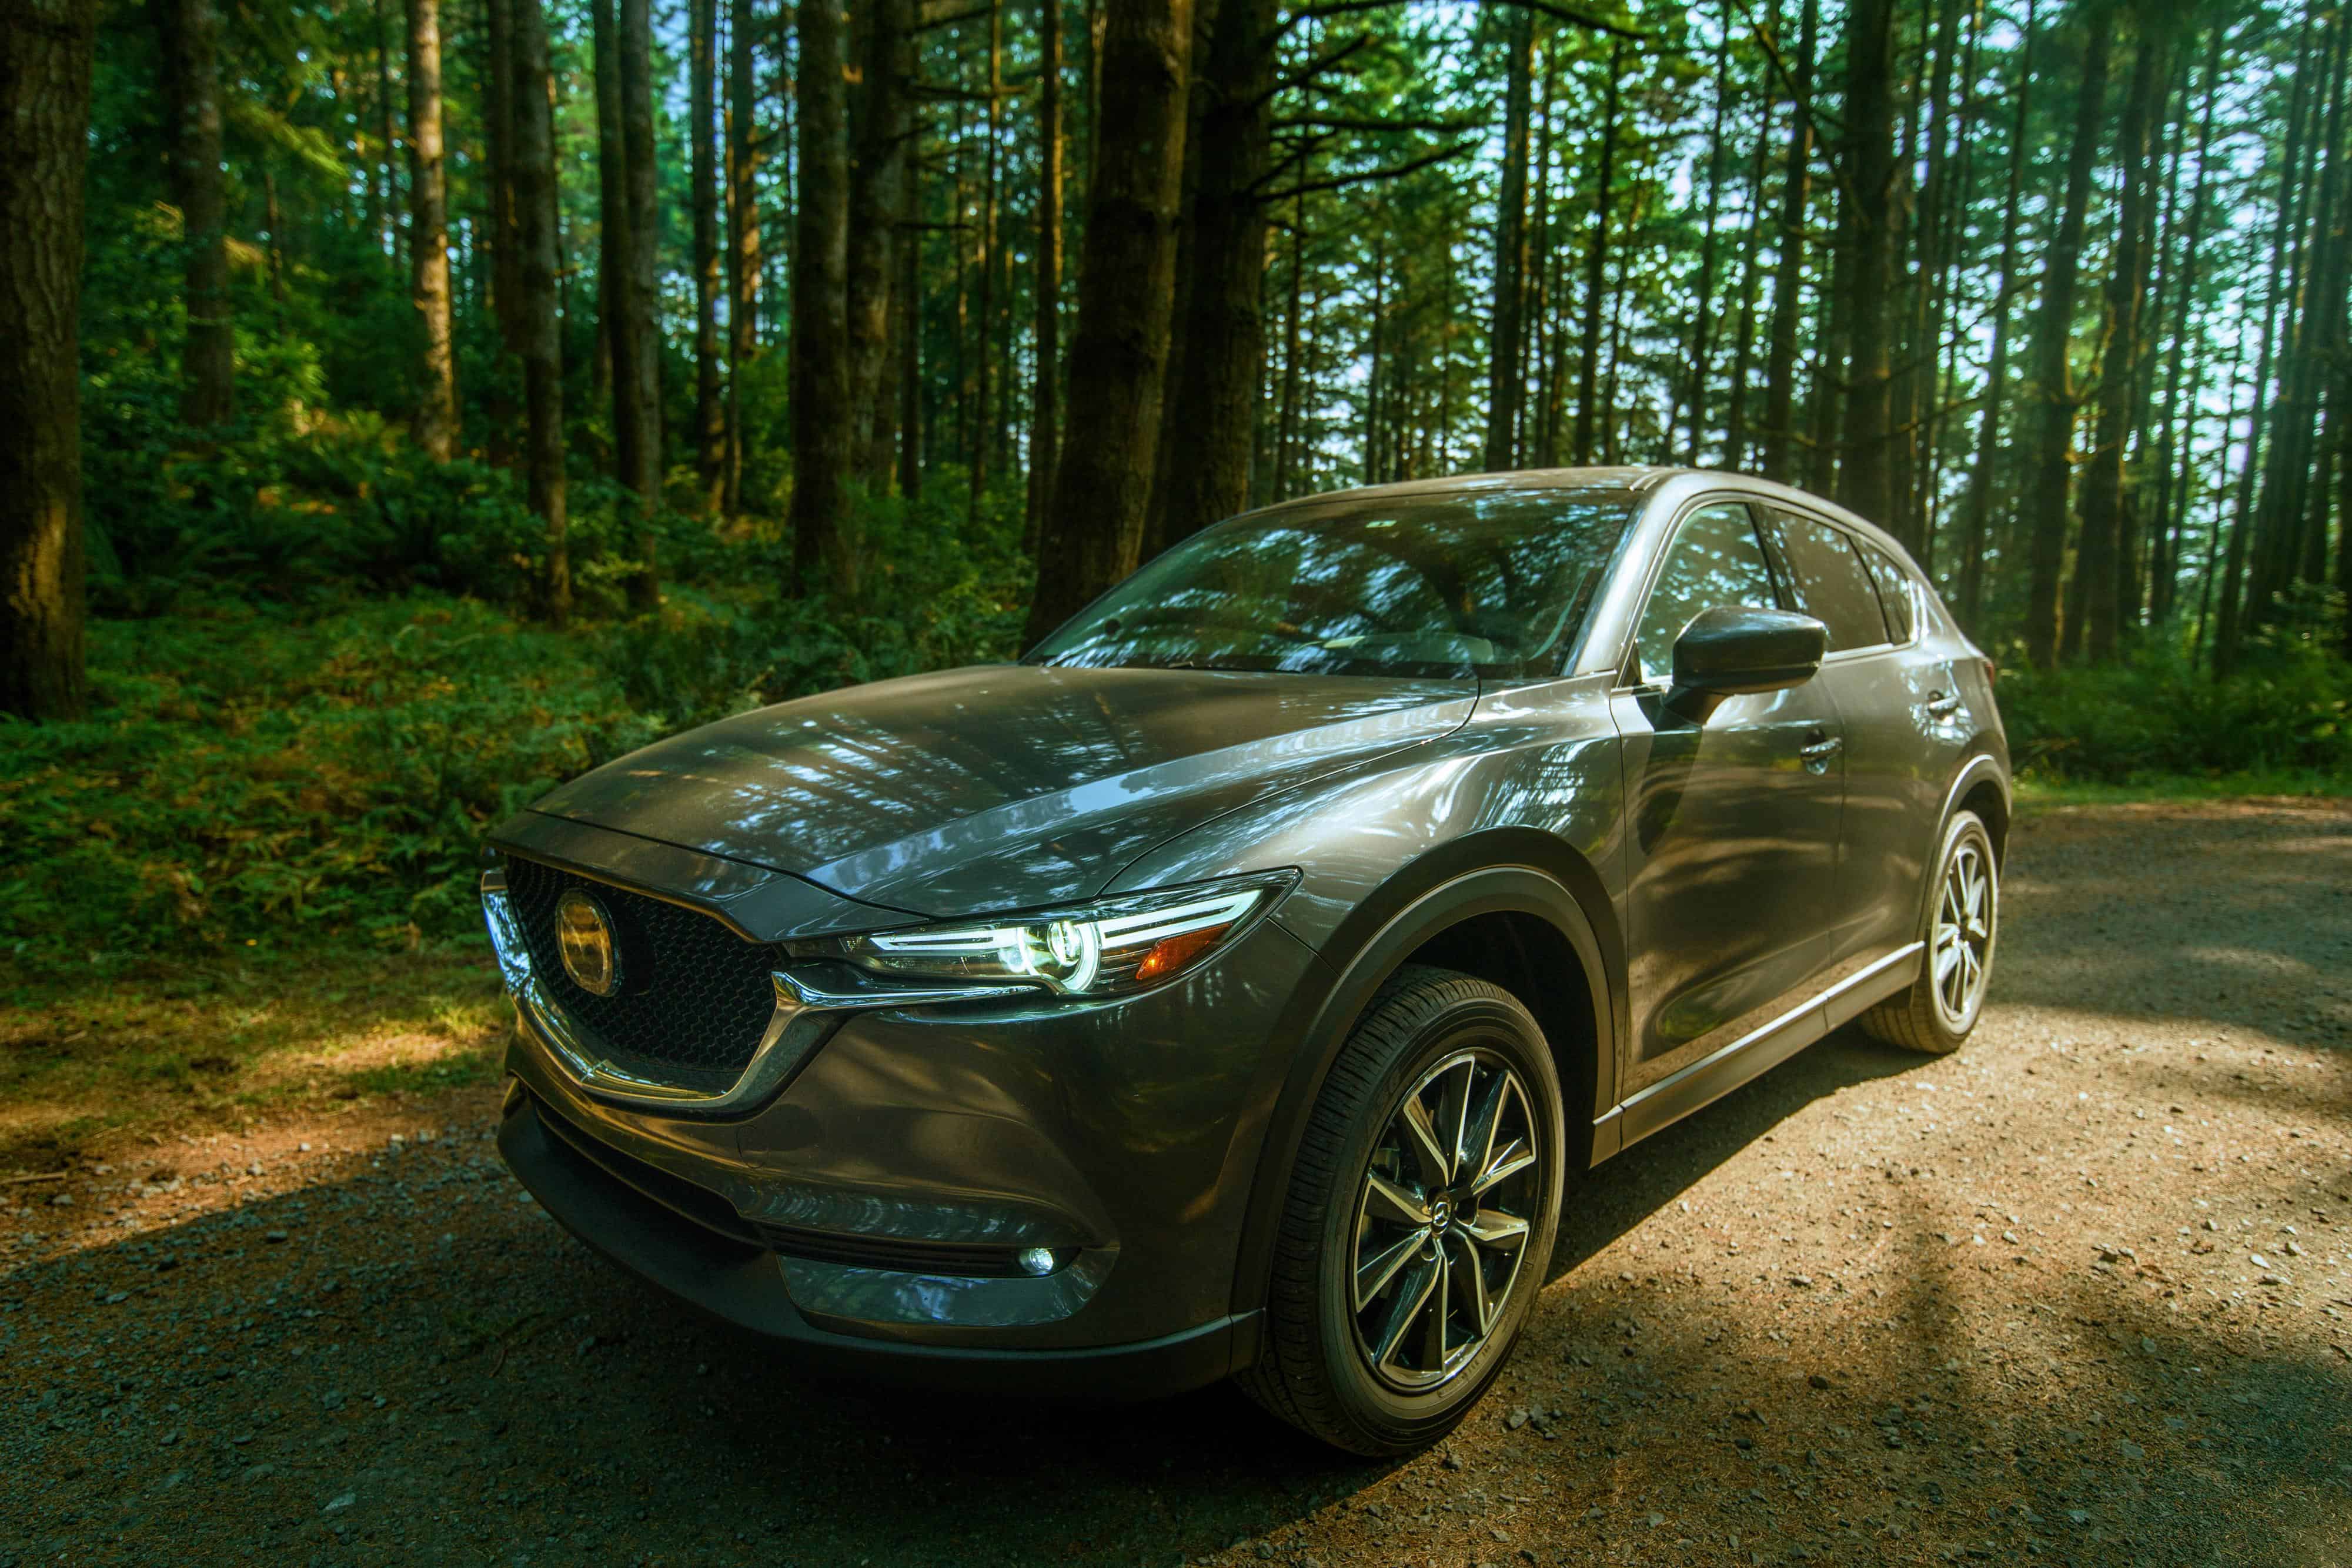 5 Features You'll Love About The 2017 Mazda CX-5 | Mazda CX-5 Review